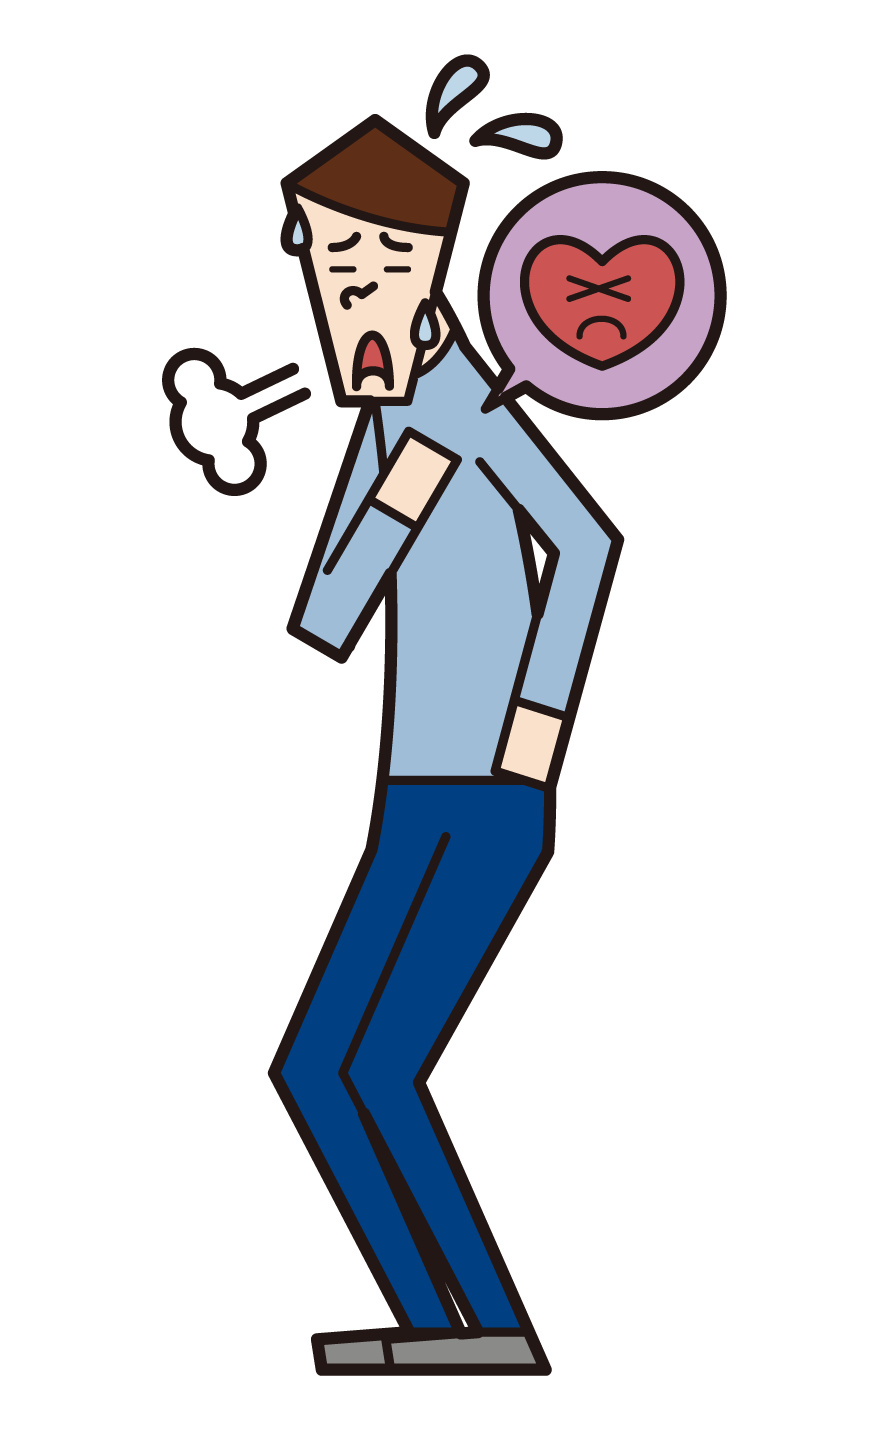 Illustration of a person (male) who feels palpitations